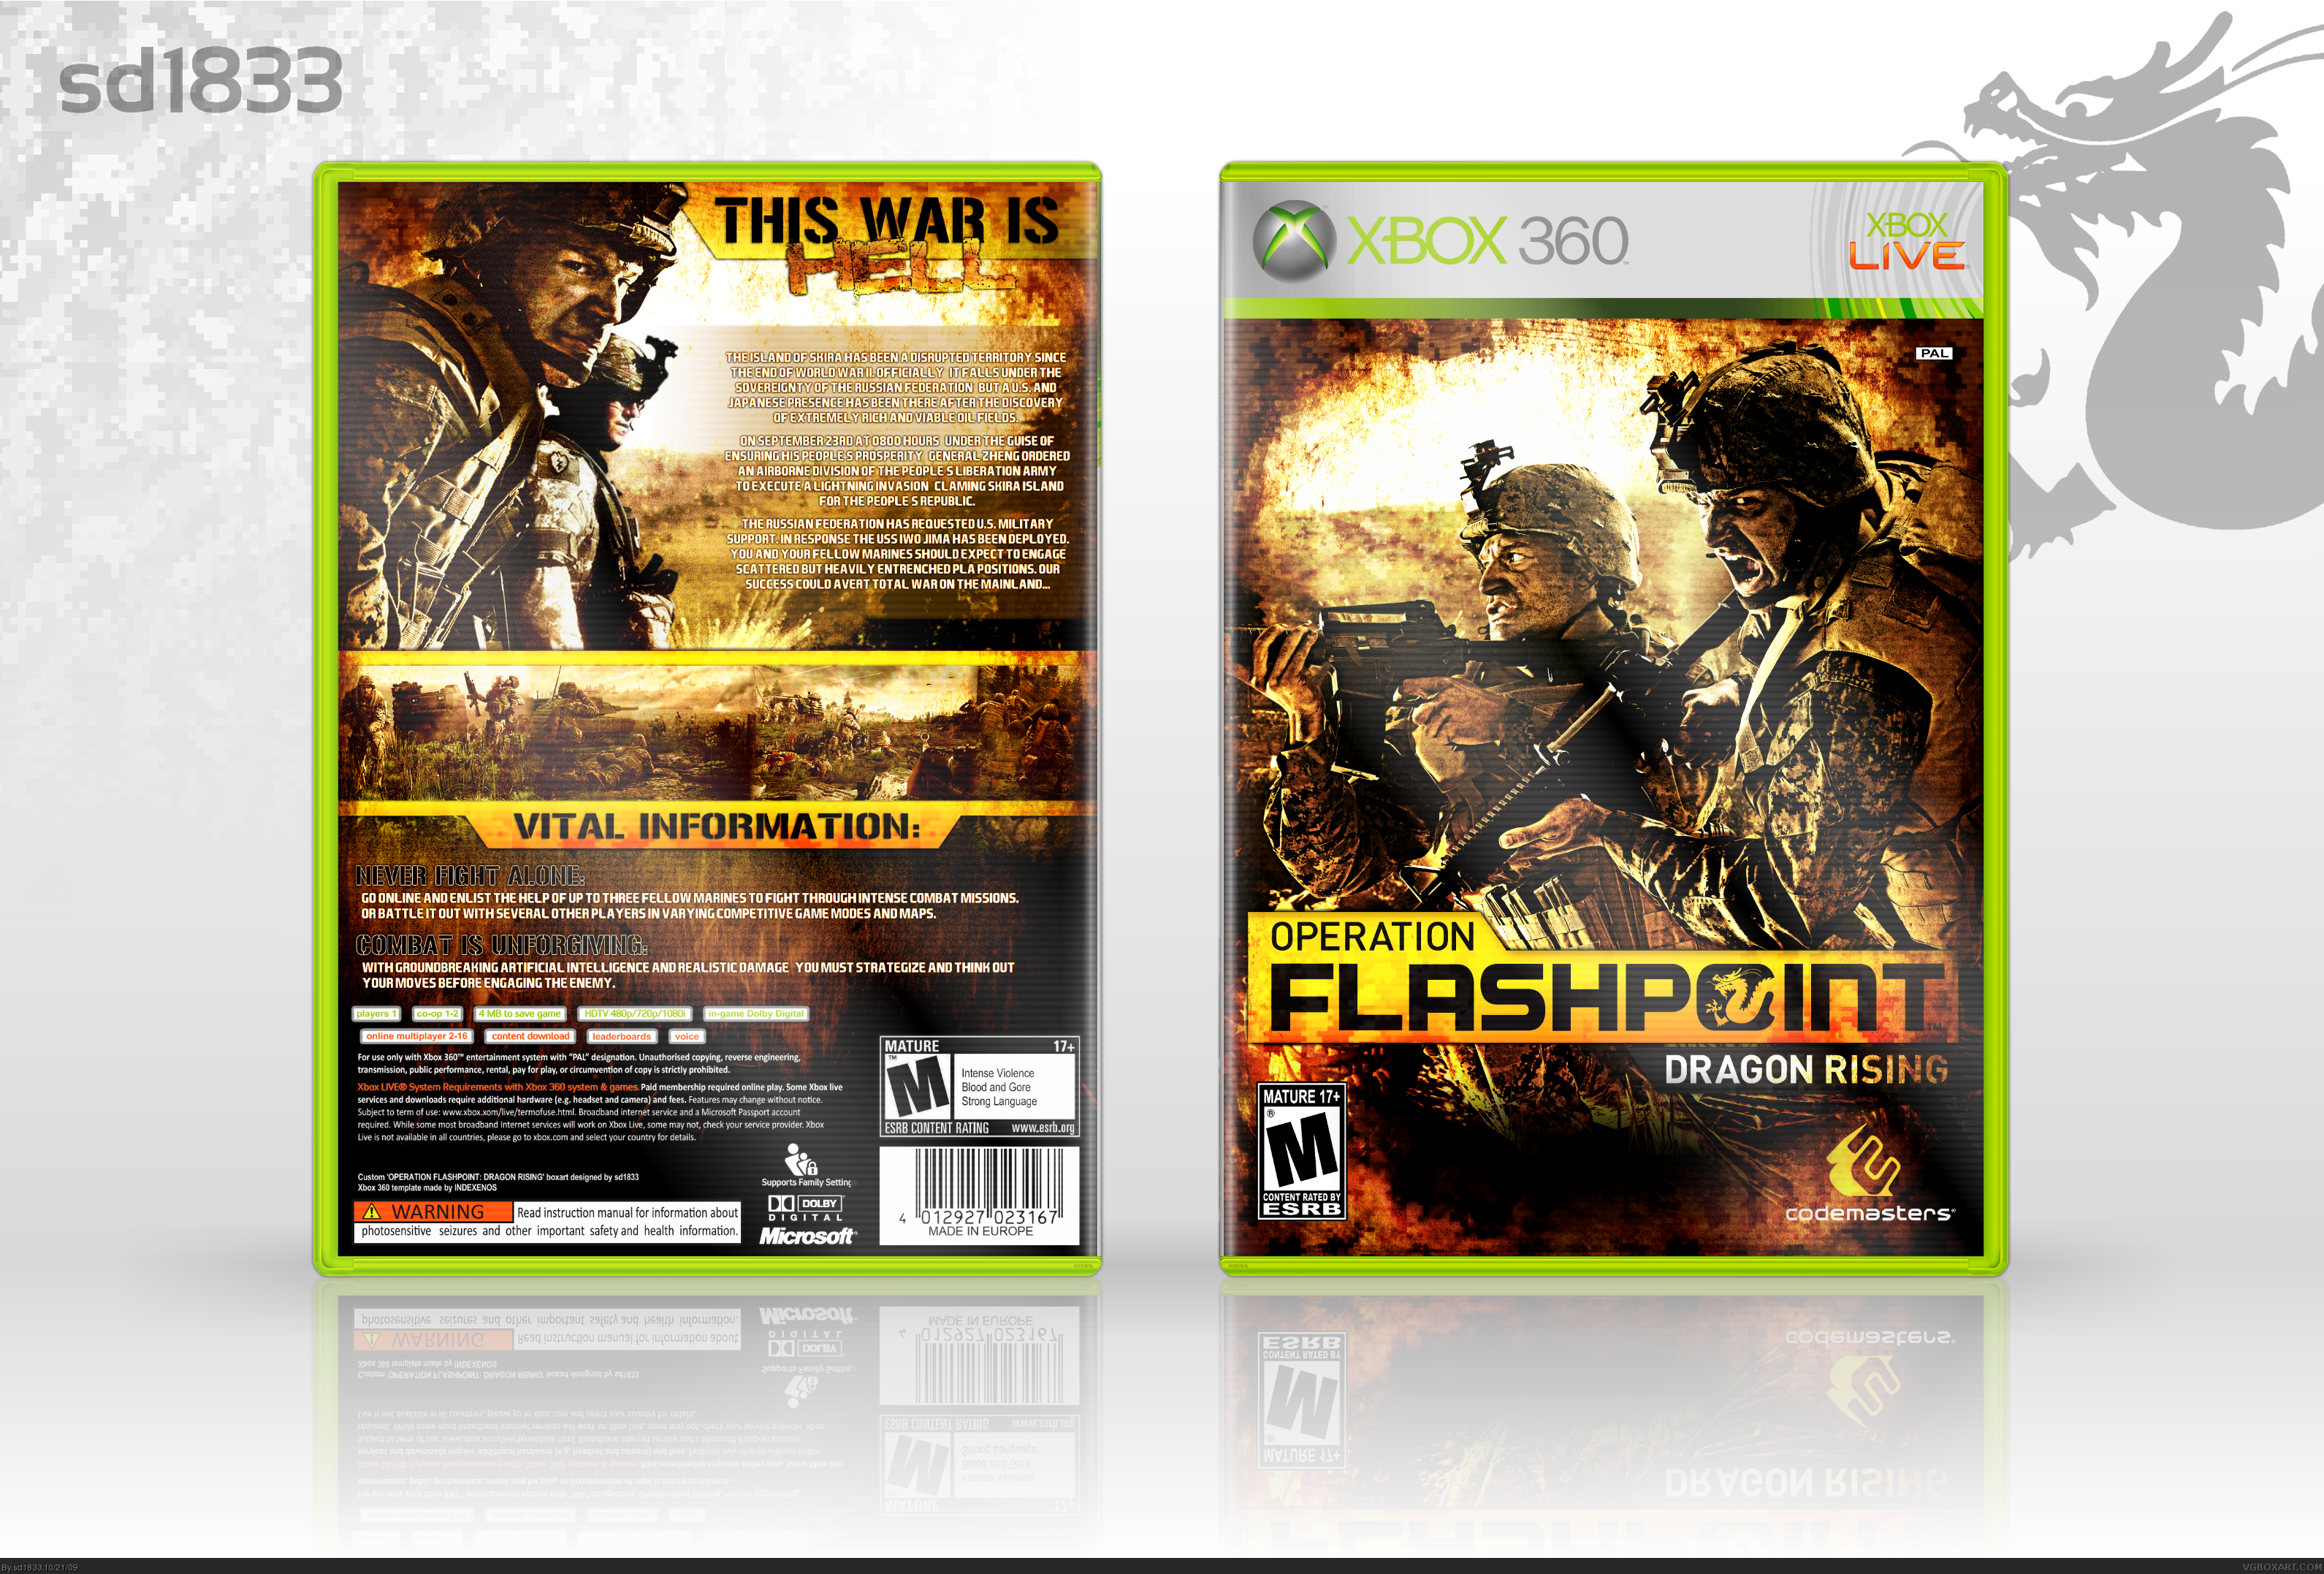 Operation Flashpoint: Dragon Rising box cover